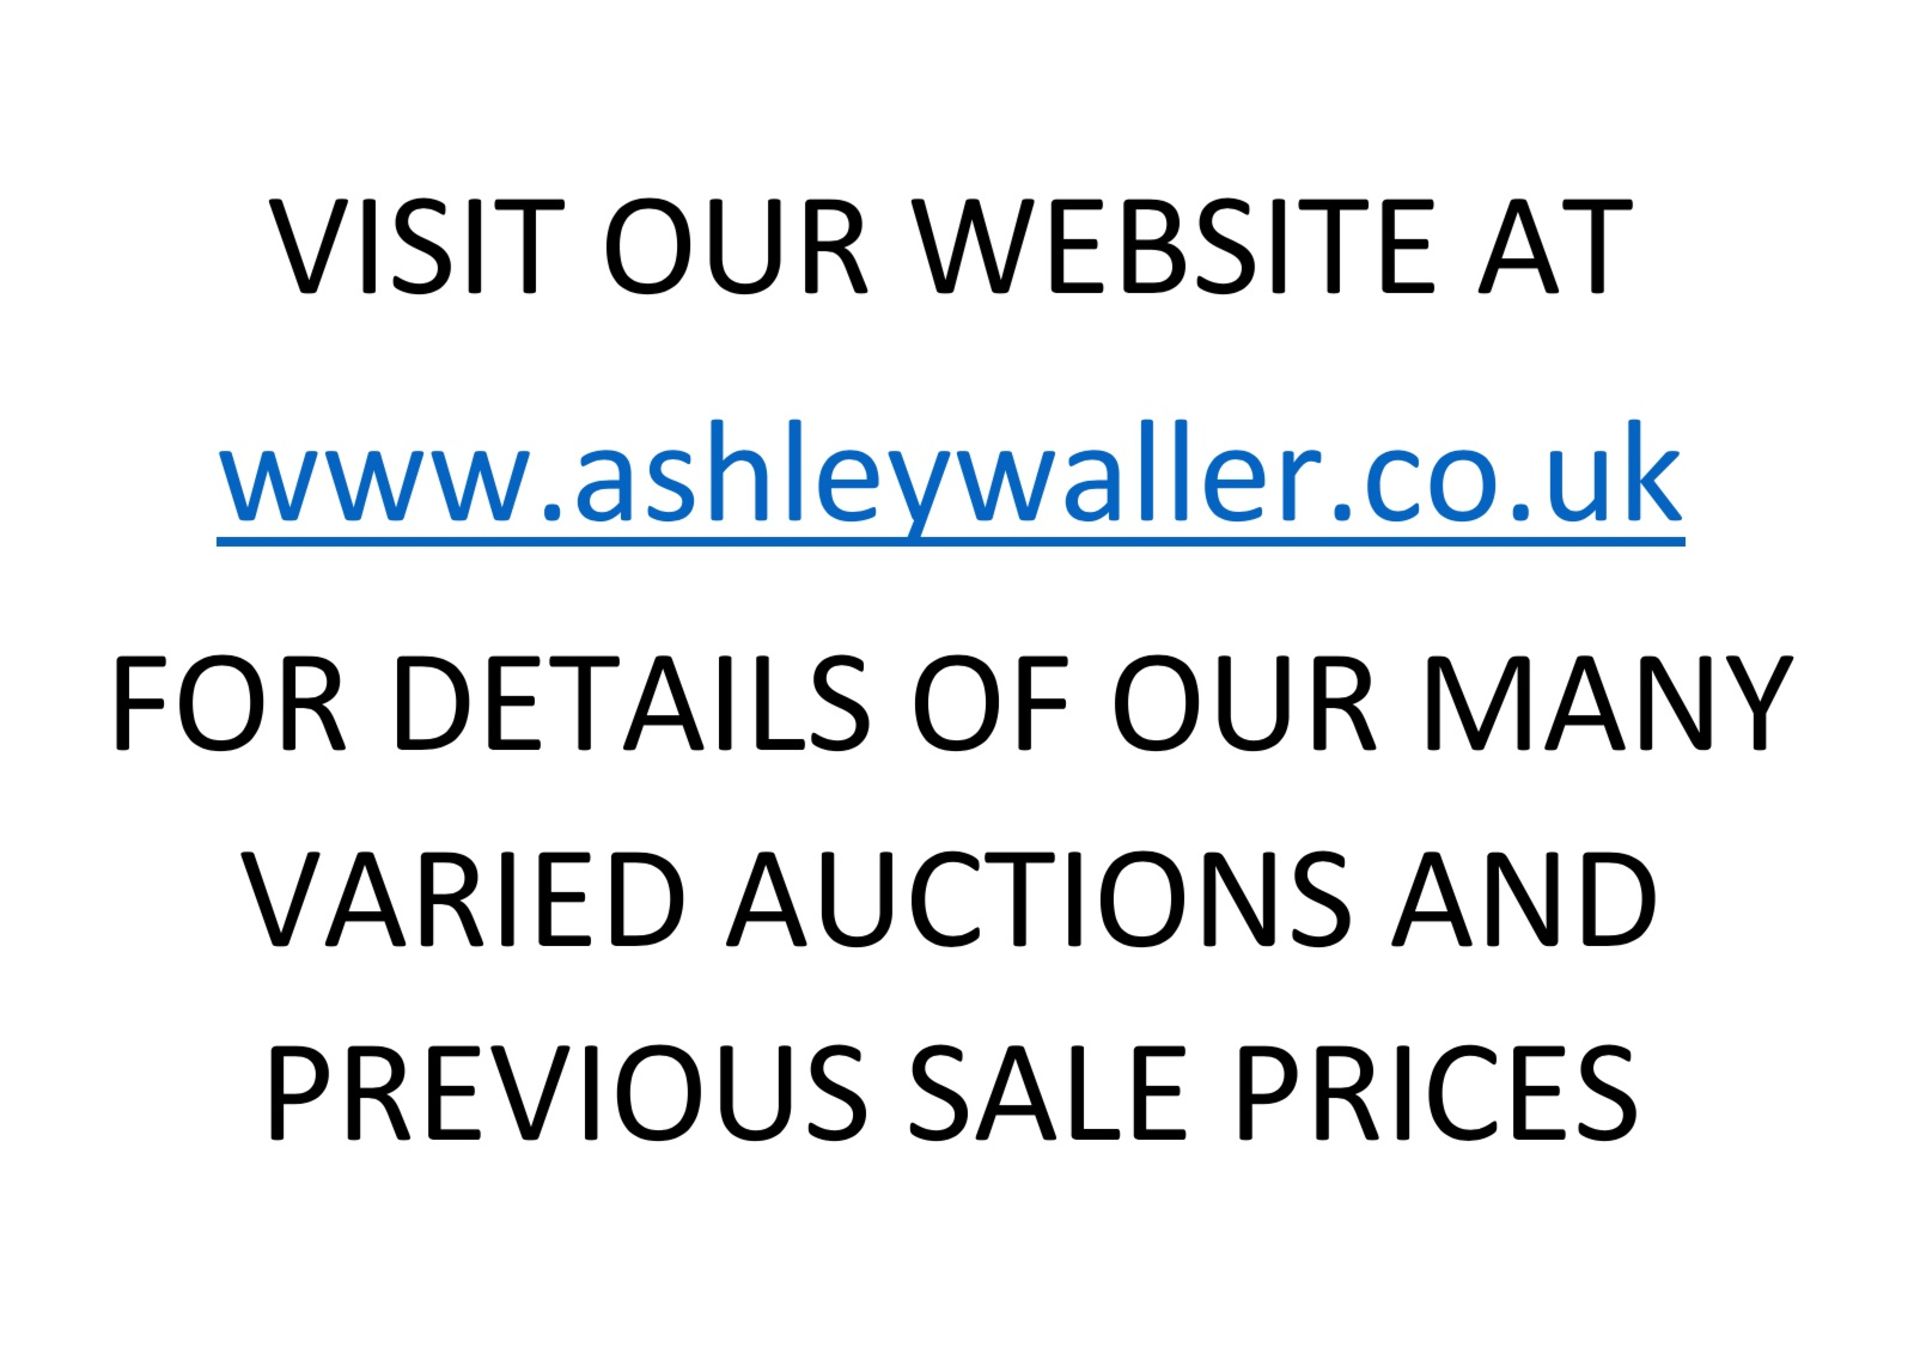 END OF SALE, THANK YOU FOR YOUR BIDDING. OUR NEXT SALE IS ON THE 27TH & 28TH SEPTEMBER 2023